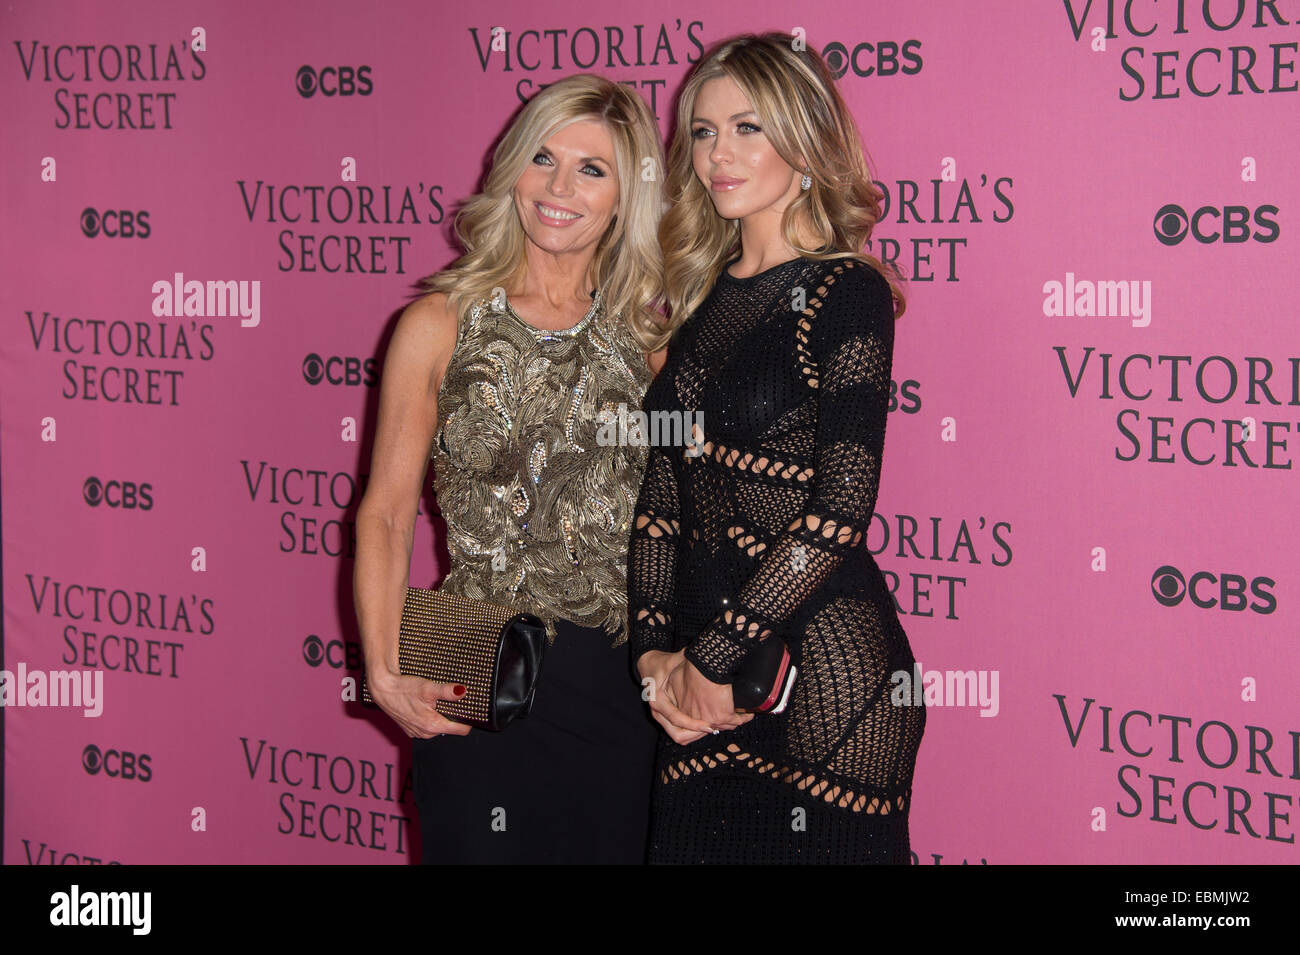 Abbey Clancy and Karen Clancy at the Victoria's Secret fashion show in London. Stock Photo